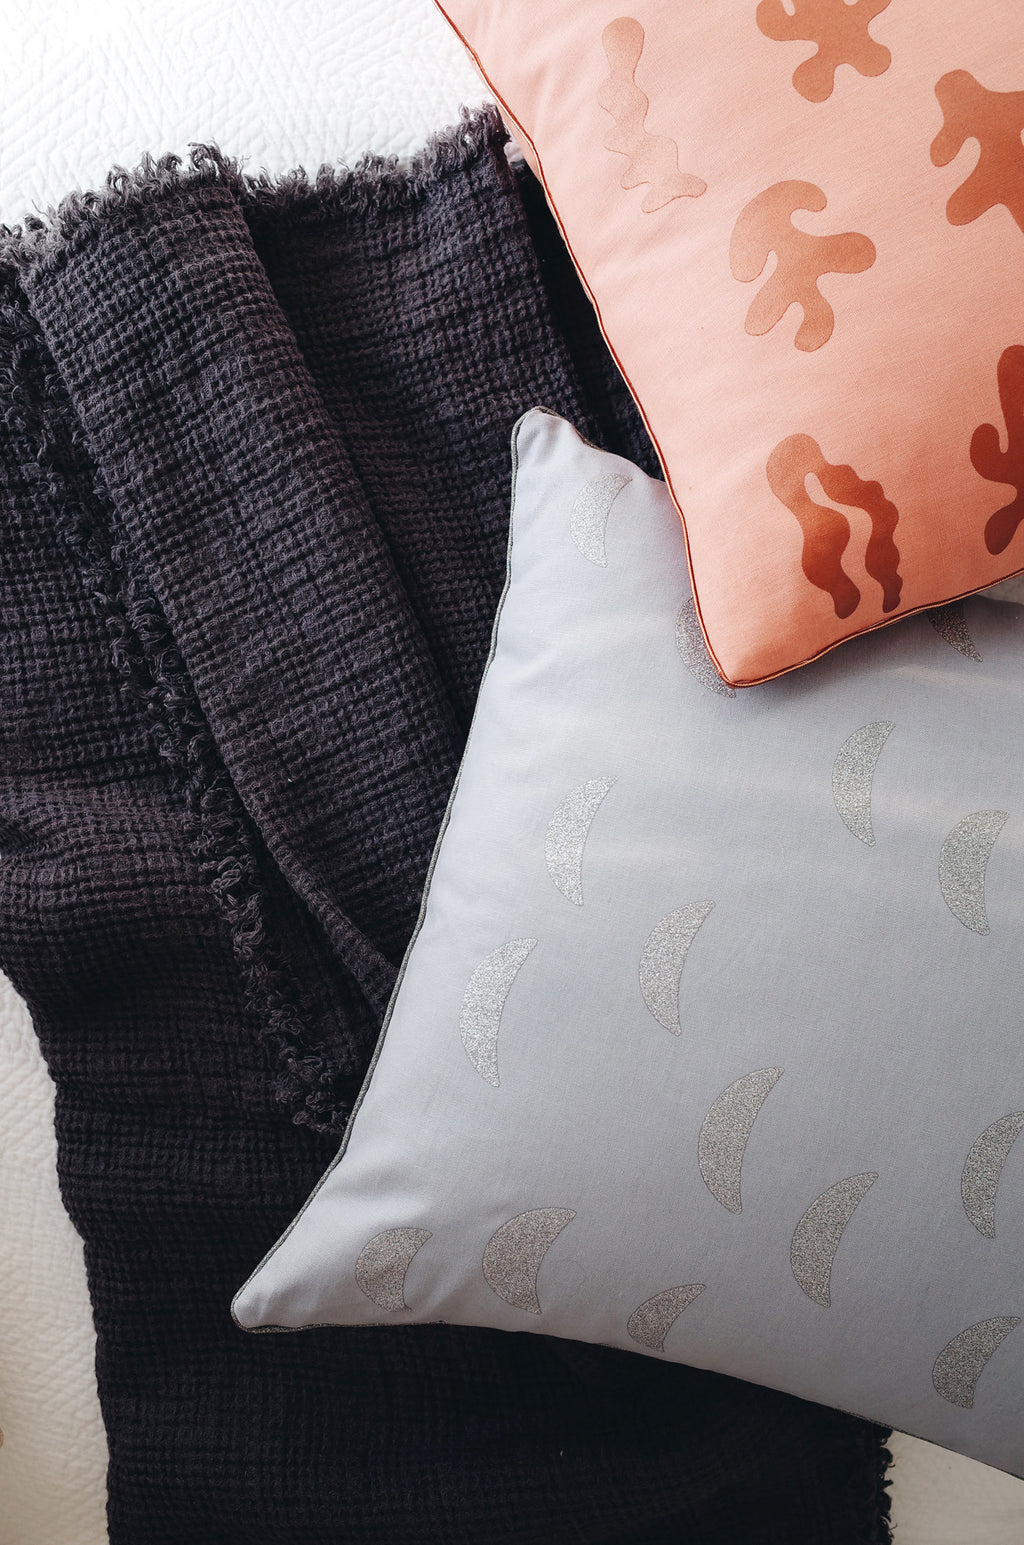 2: Stylized Image of Two Printed Pillows on Bed - LEIF